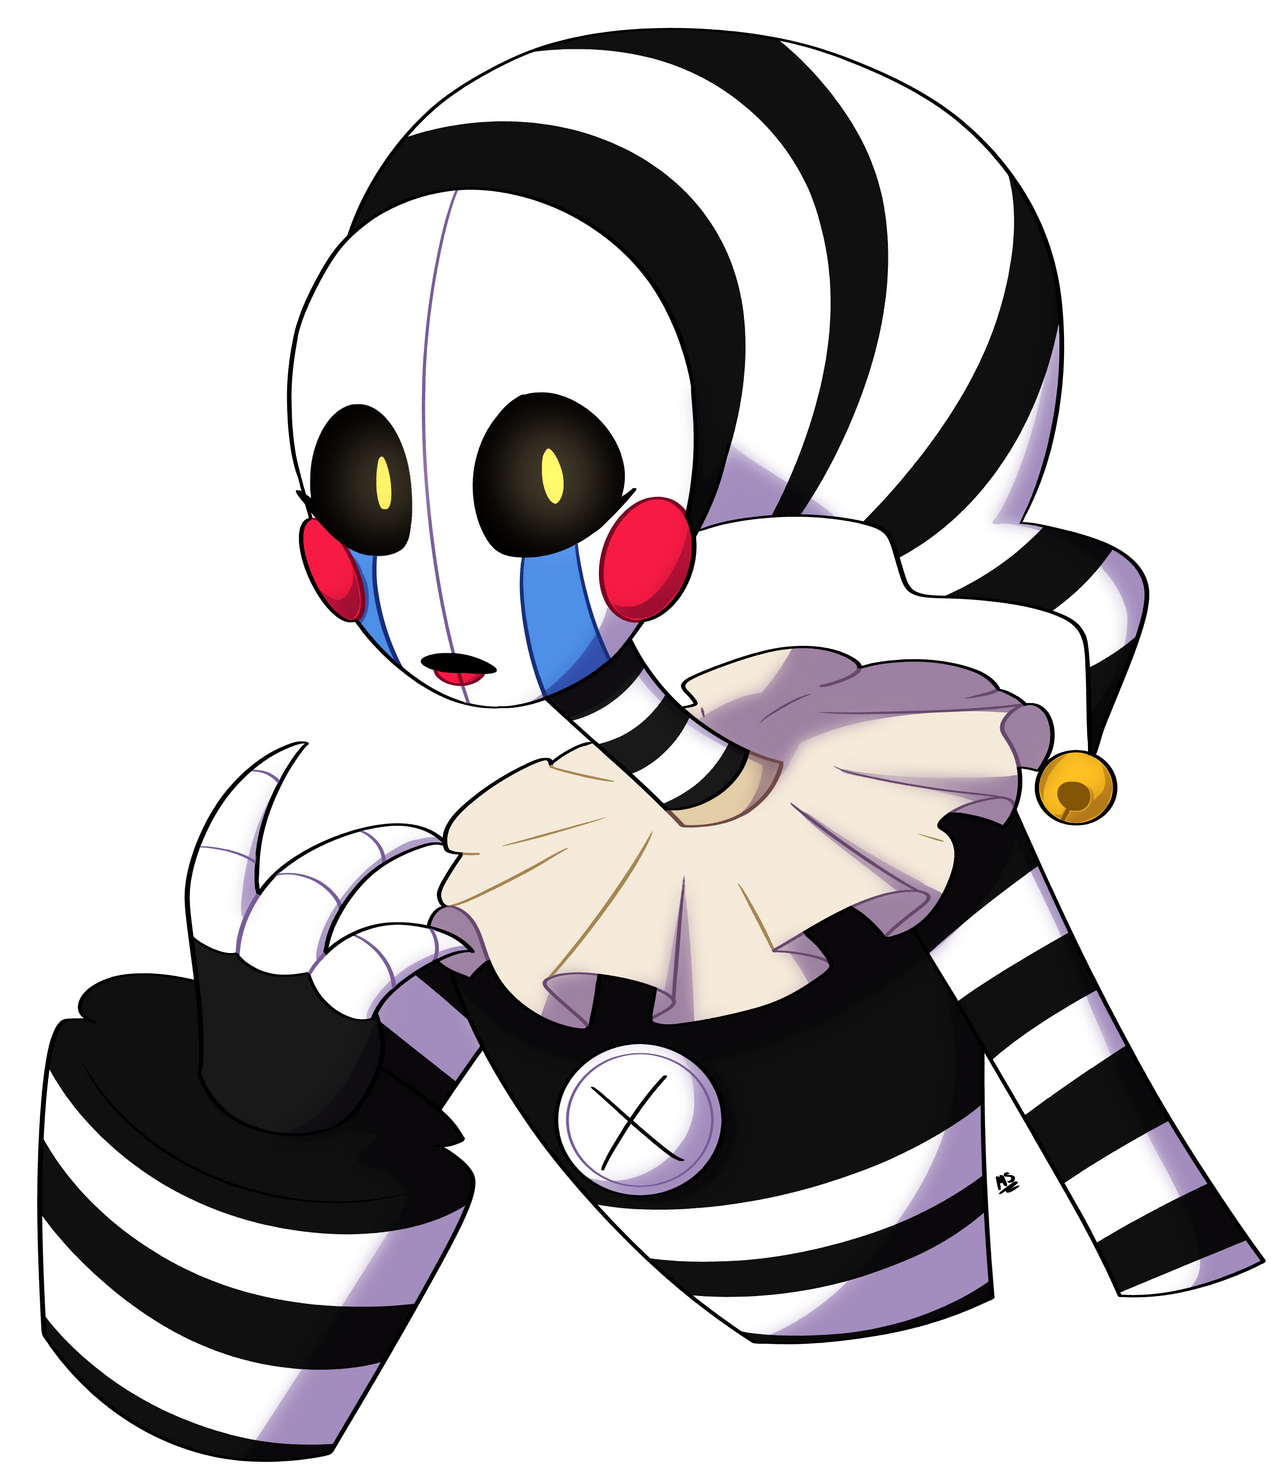 Security Puppet Stylised ::. by LadyGalaxy-Drawz on DeviantArt